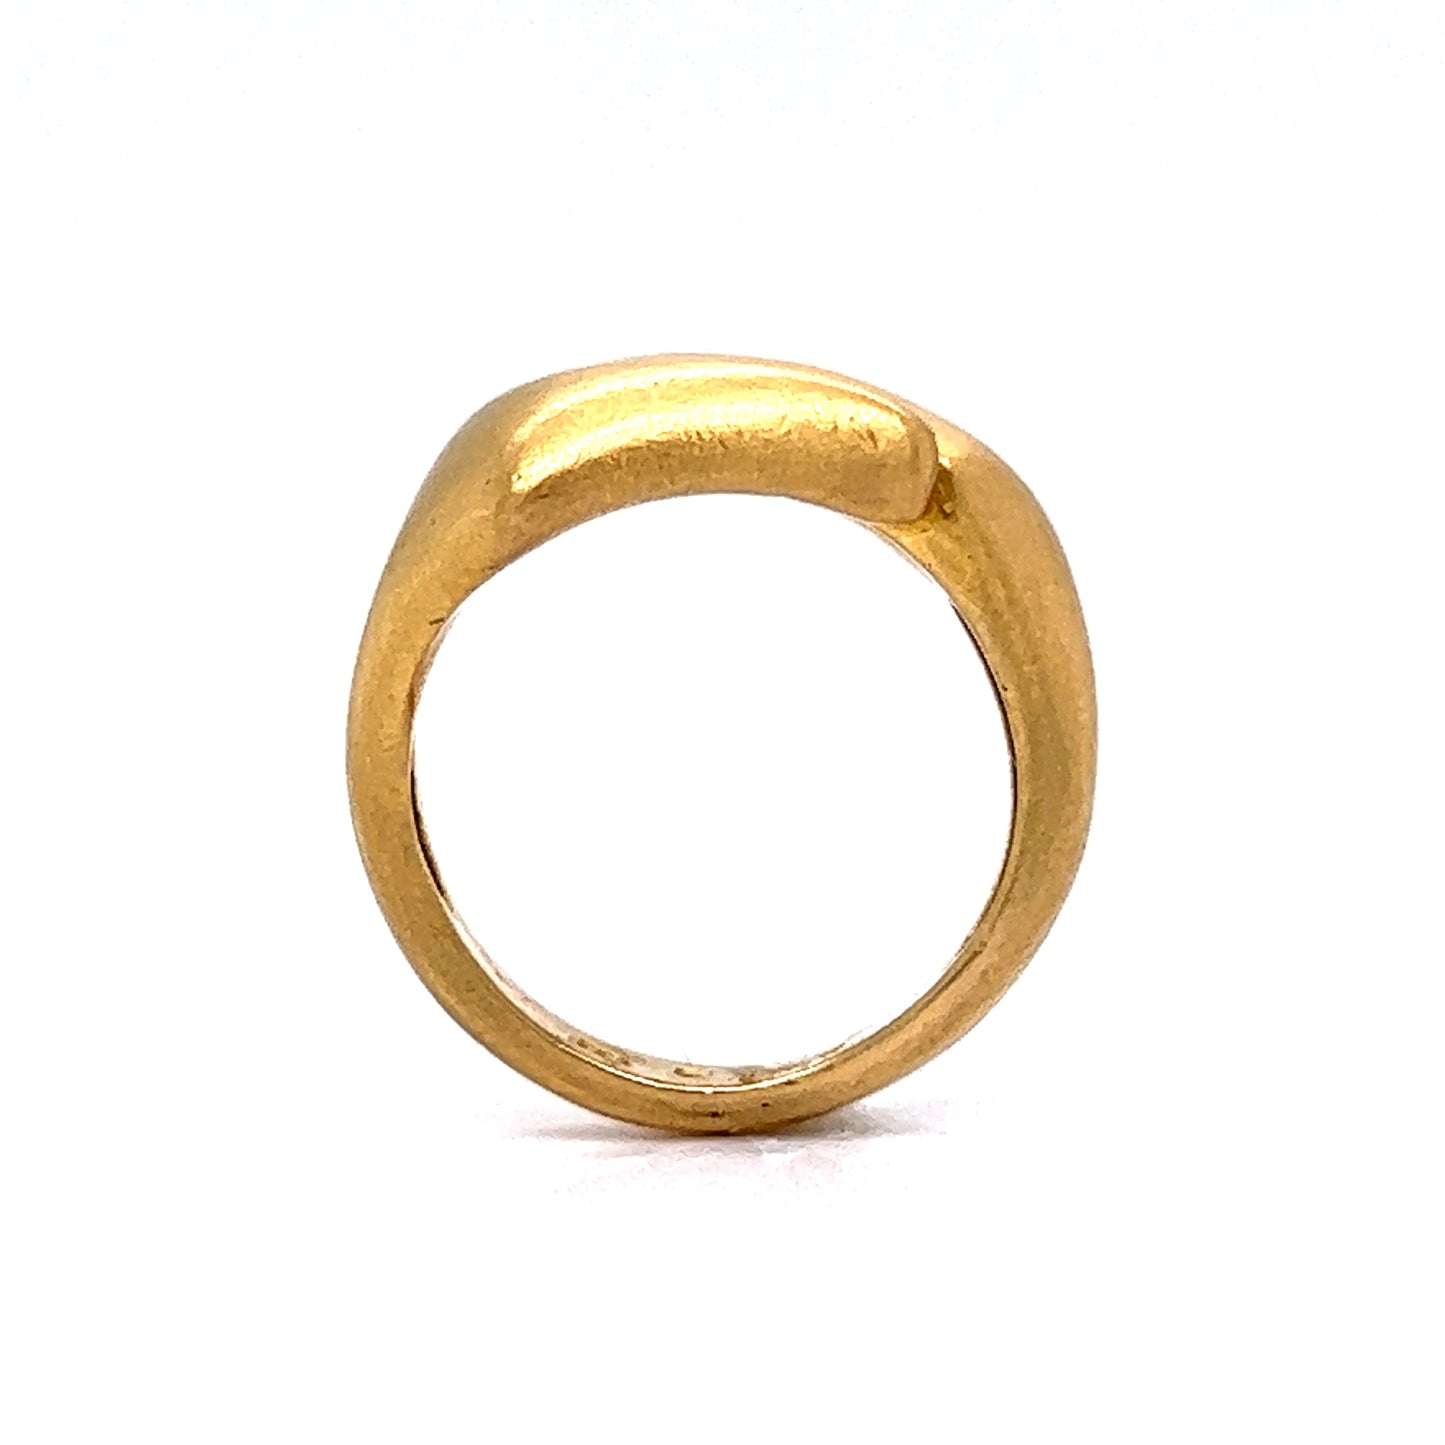 Brushed Finish Bypass Ring in 22k Yellow Gold